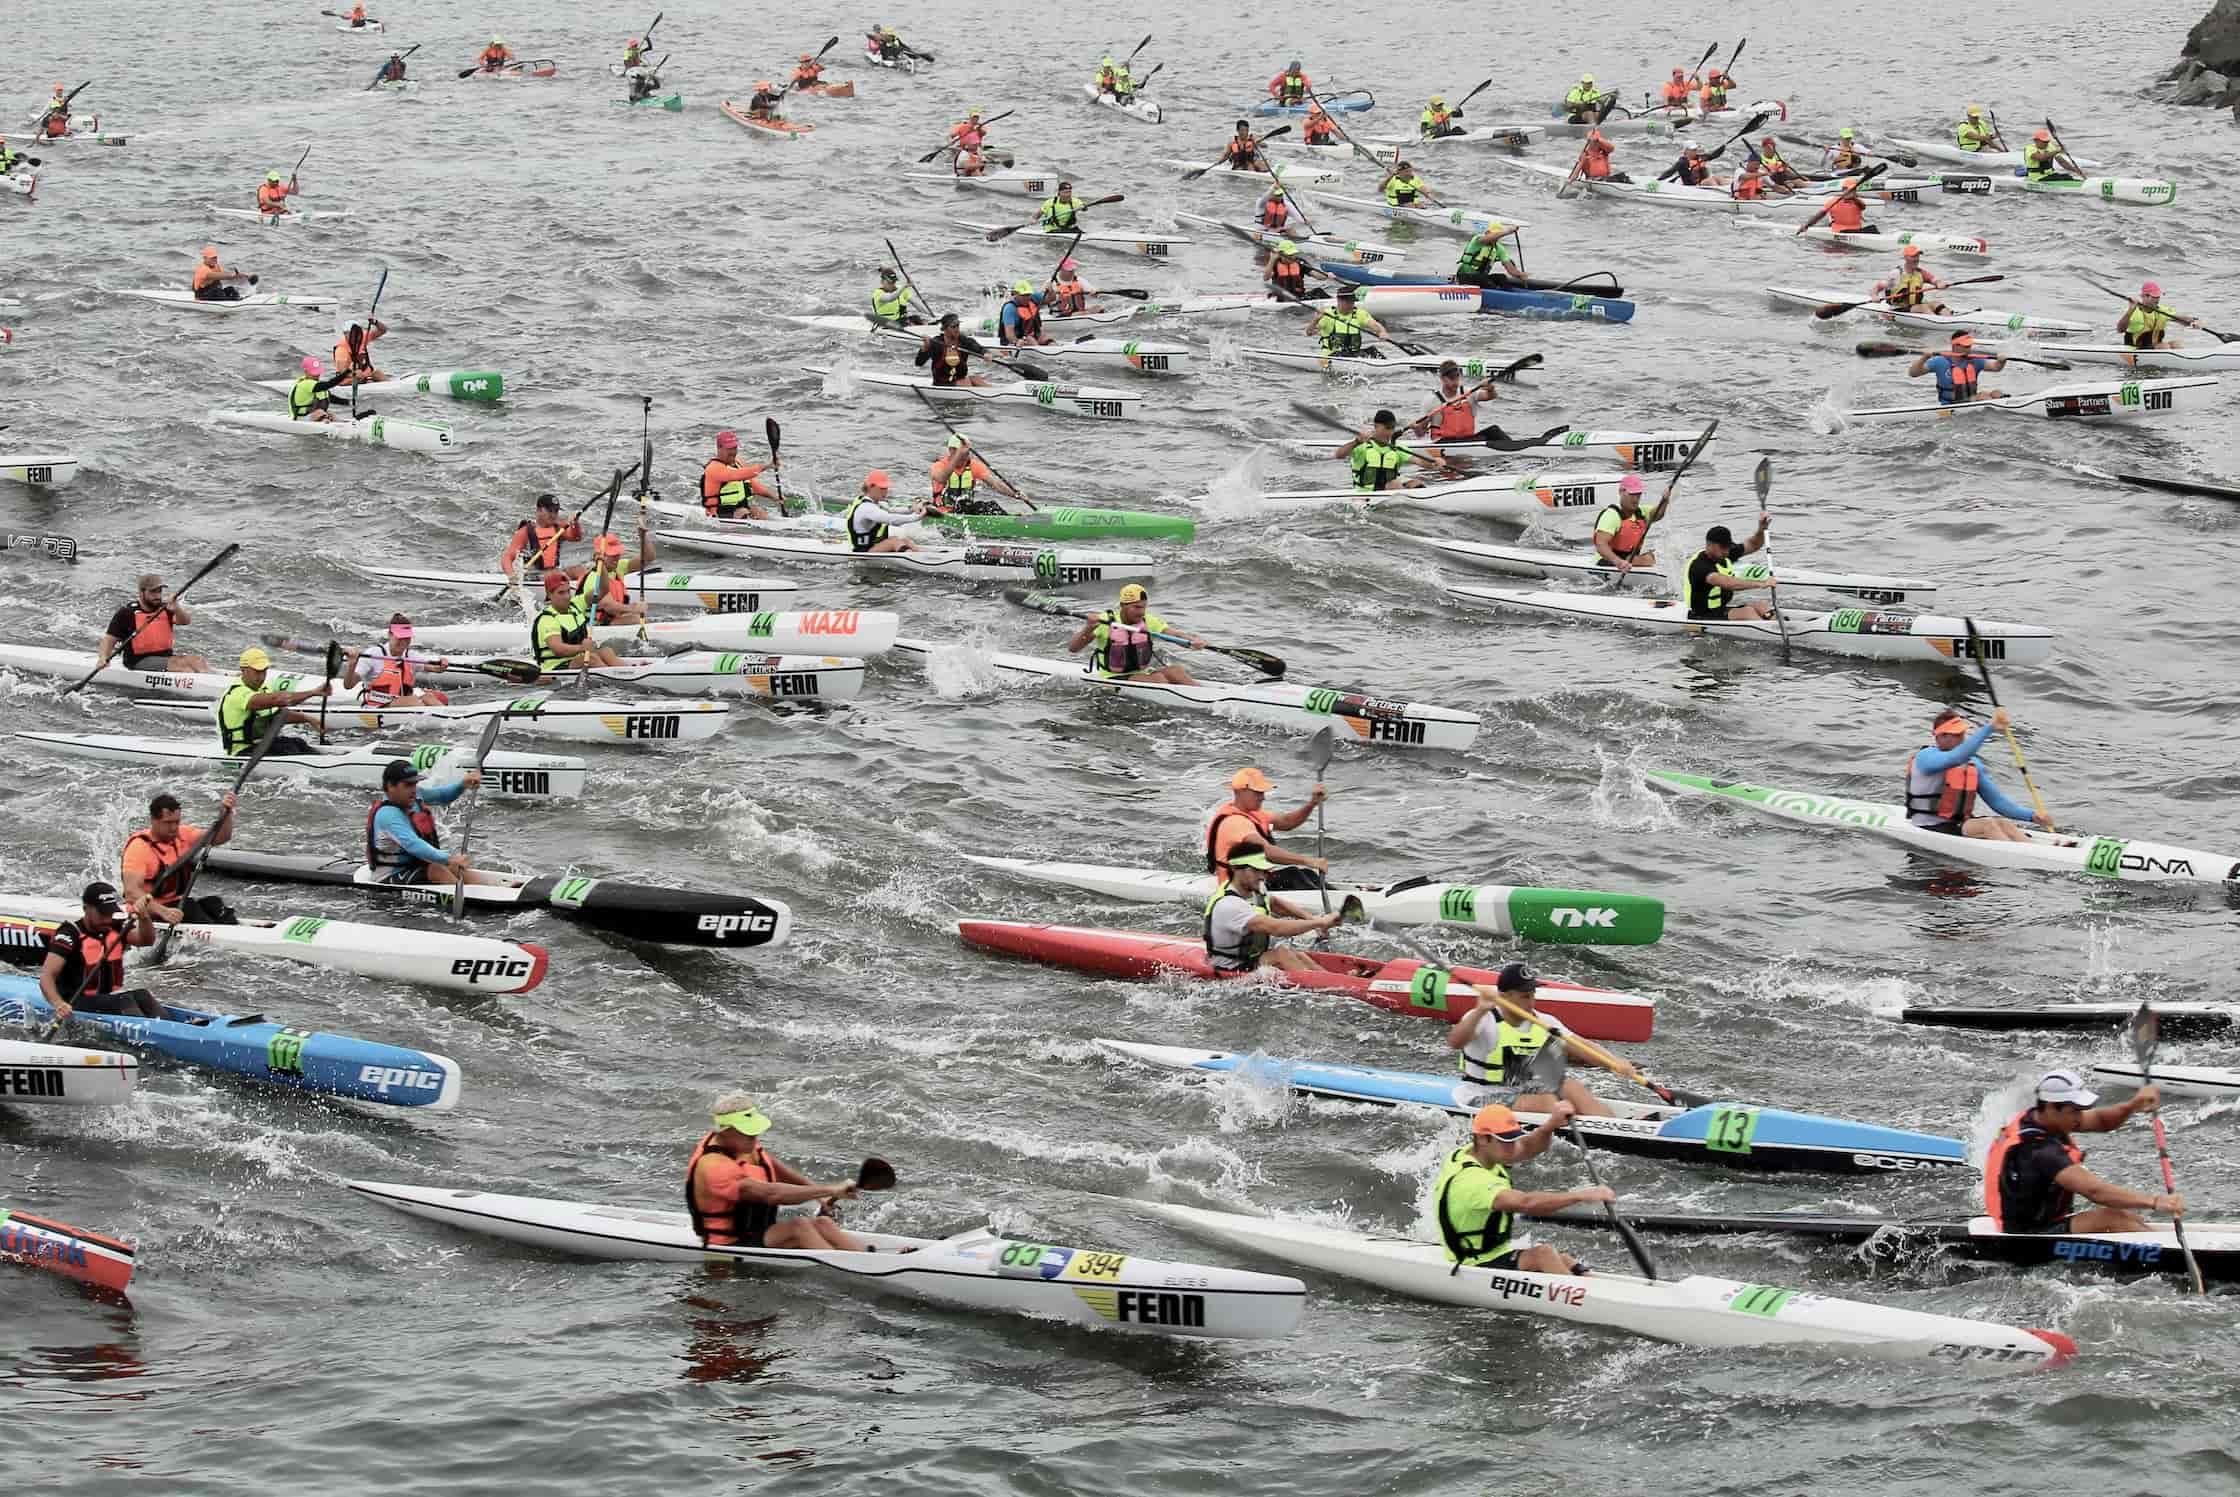 10-facts-you-must-know-about-ocean-kayak-racing